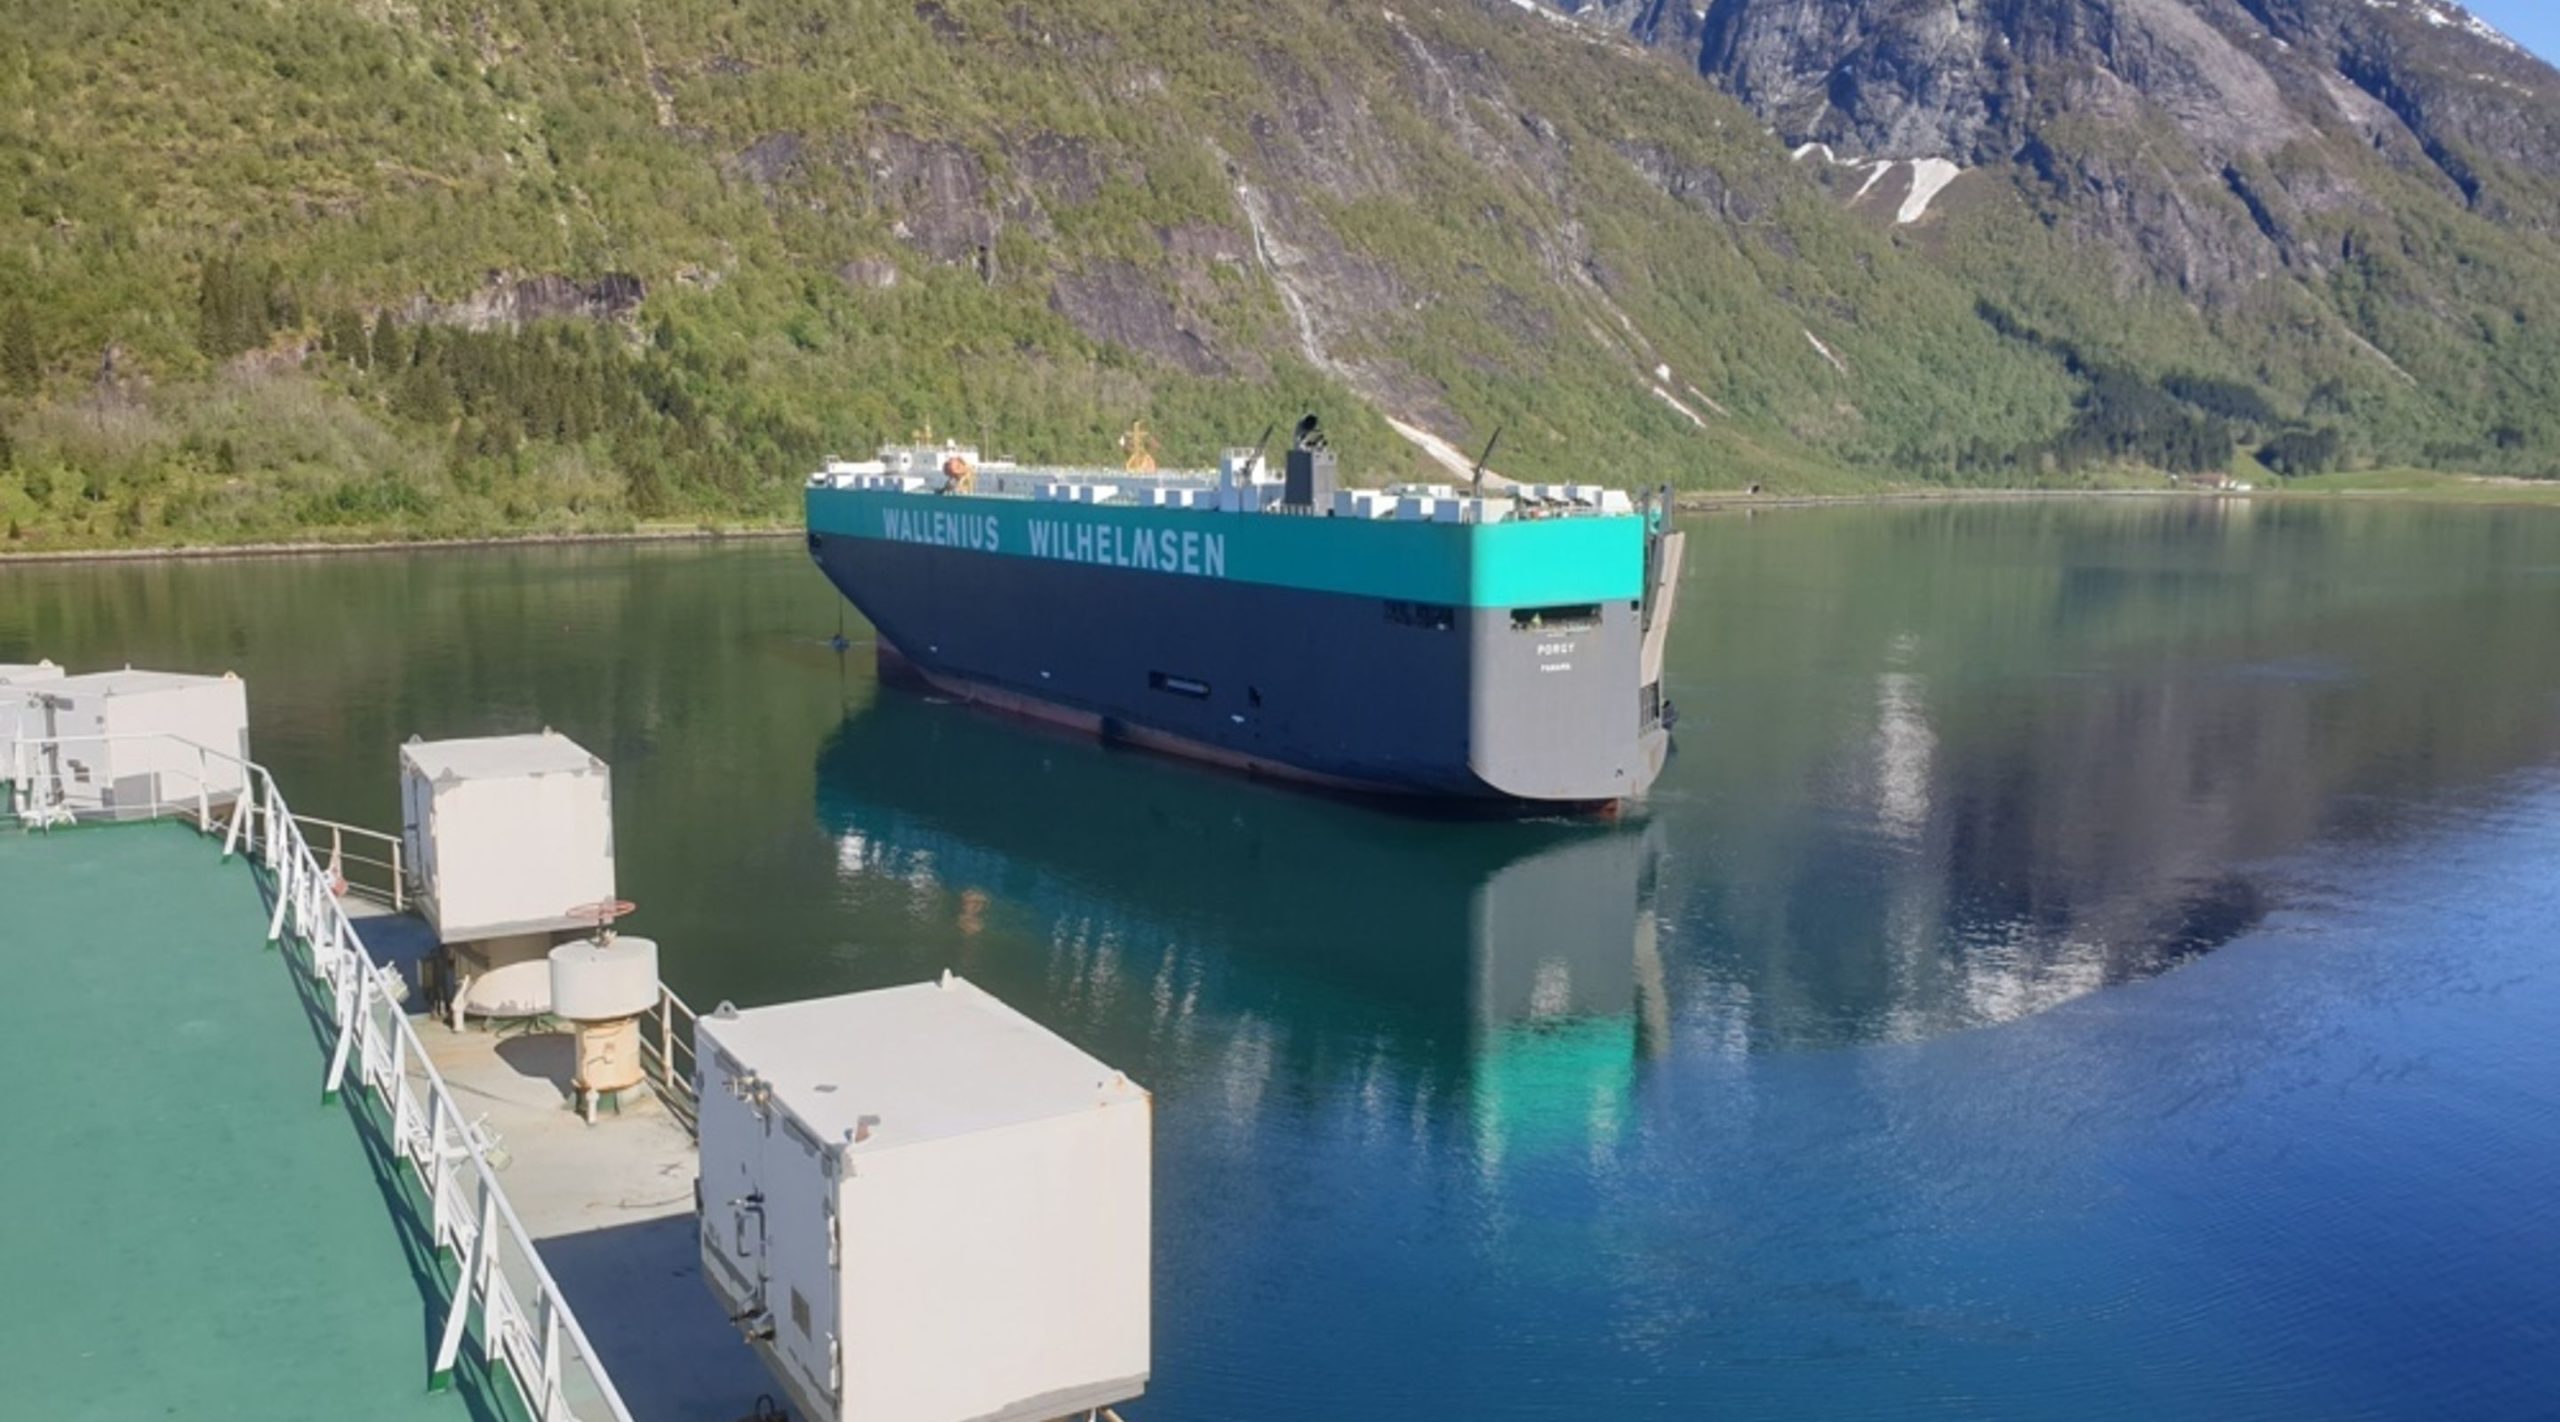 Wallenius Wilhelmsen to Reactivate More Ships Amid Improving Market Conditions